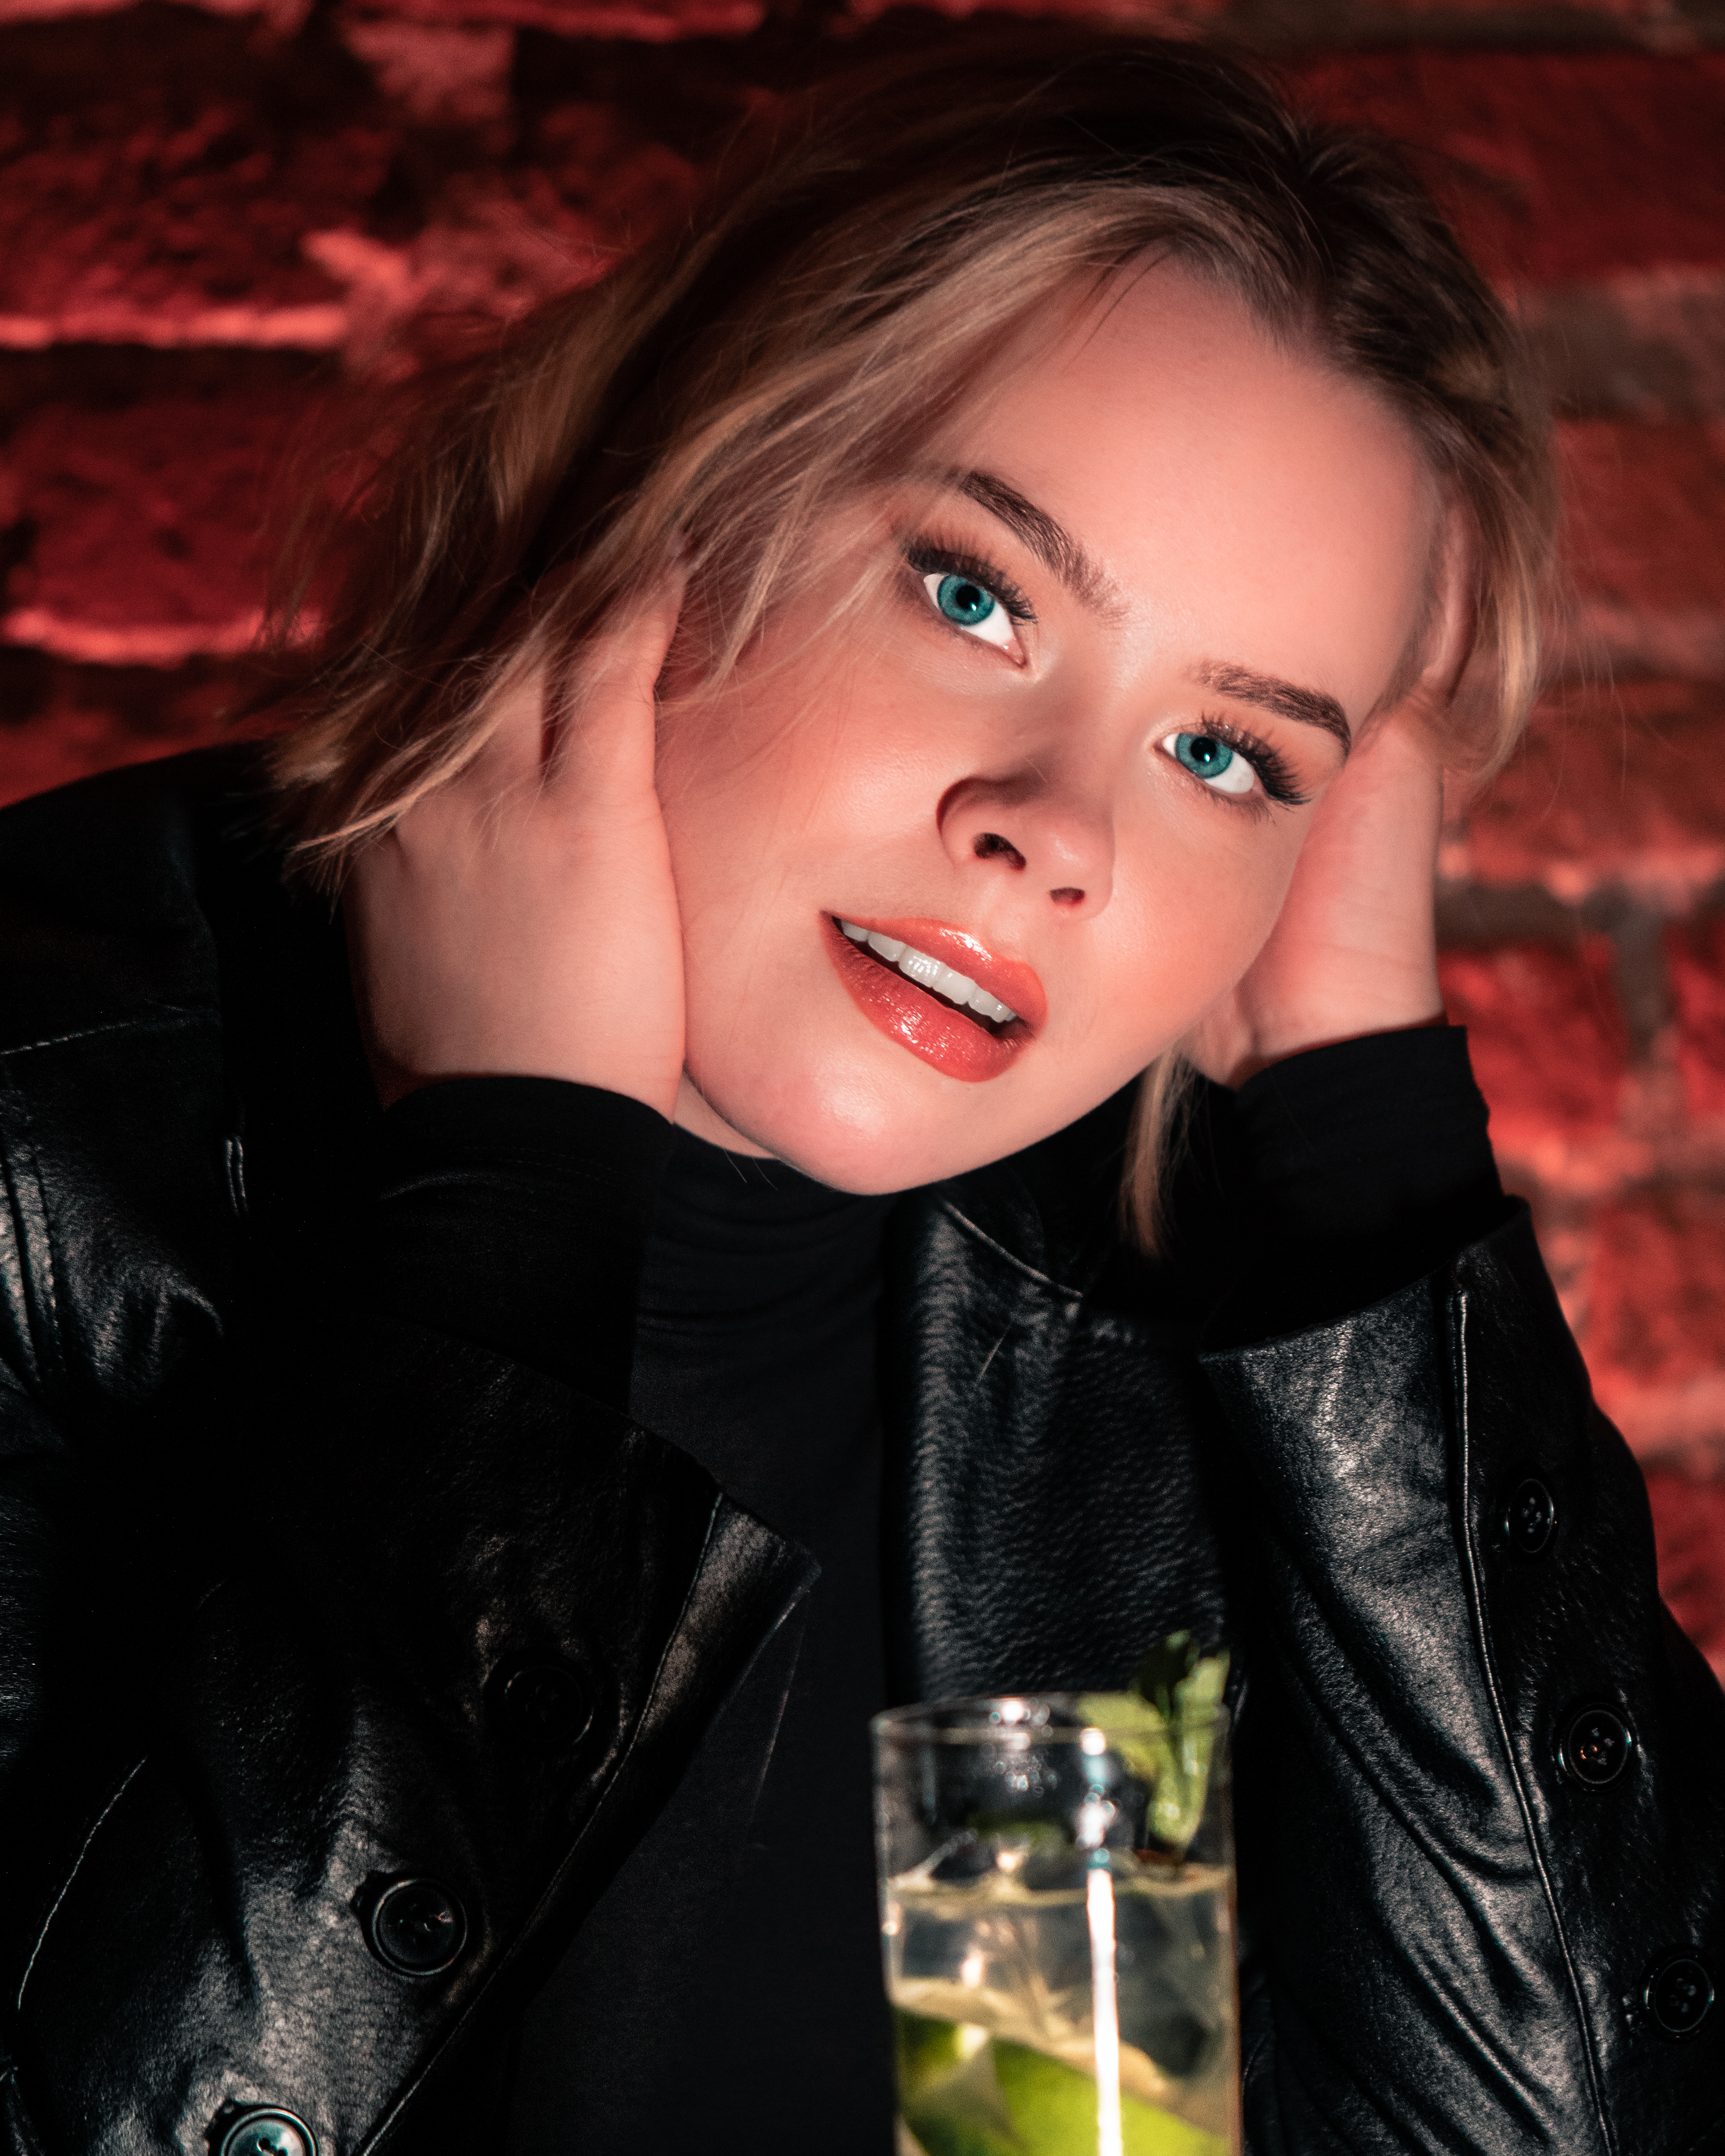 Blonde woman with blue eyes is wearing a leather jacket. A Moscow mule drink is standing on the table in front of here. There is a red brickwall behind her. She is smiling while she is sitting in a bar.